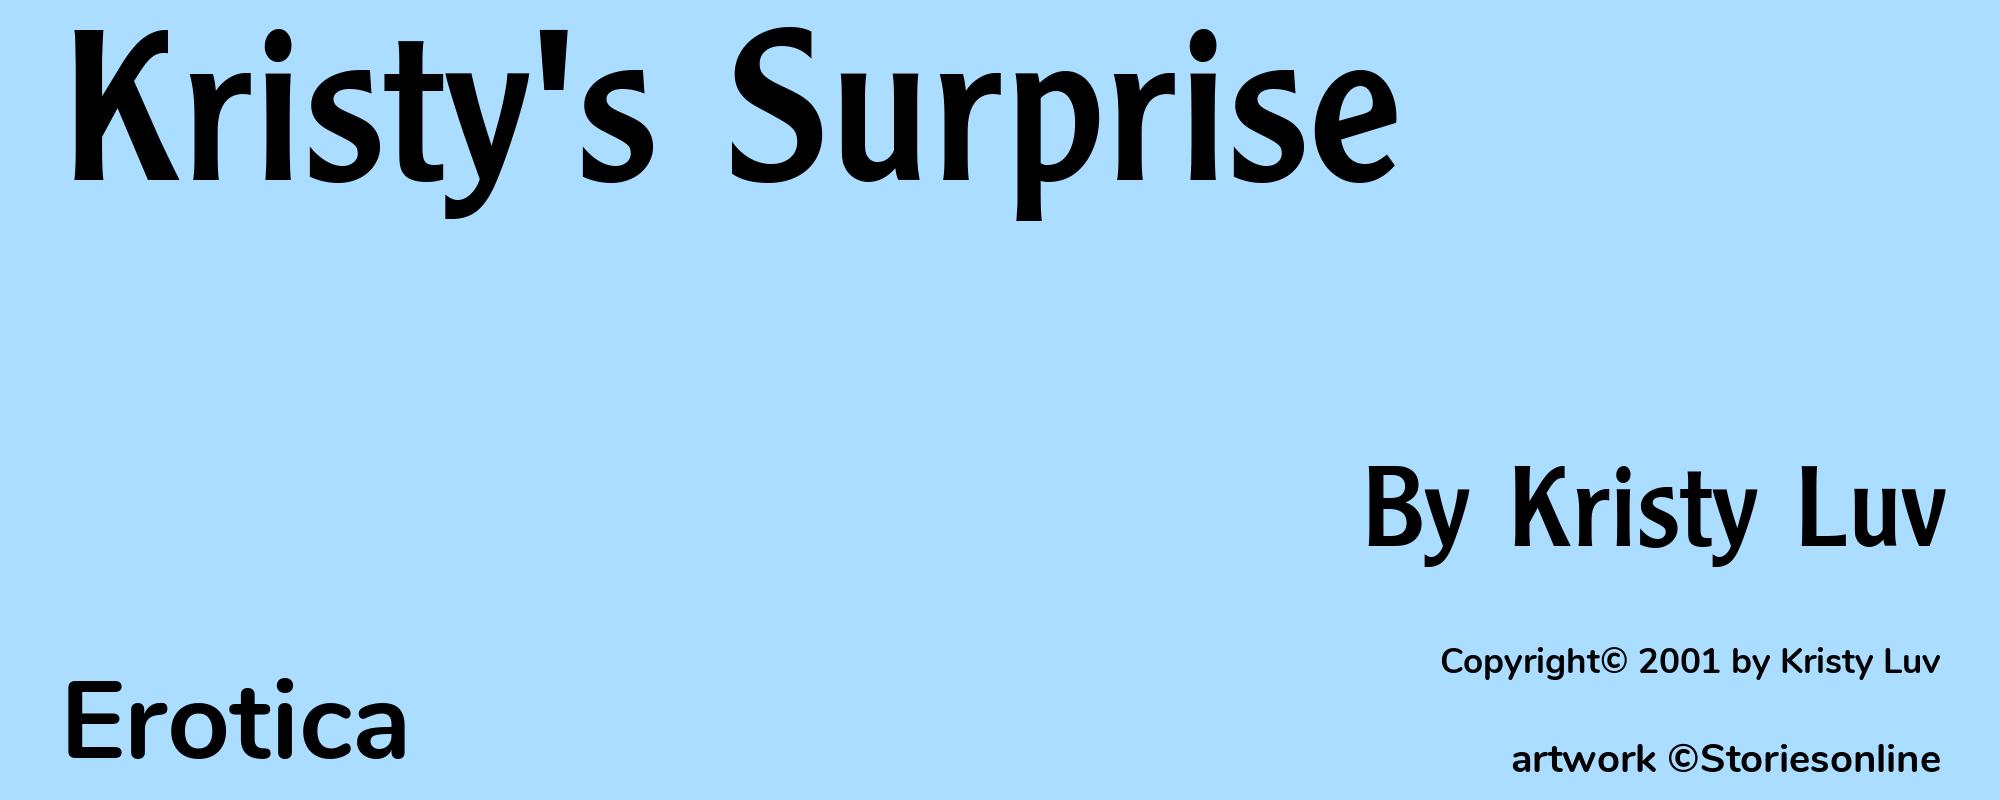 Kristy's Surprise - Cover